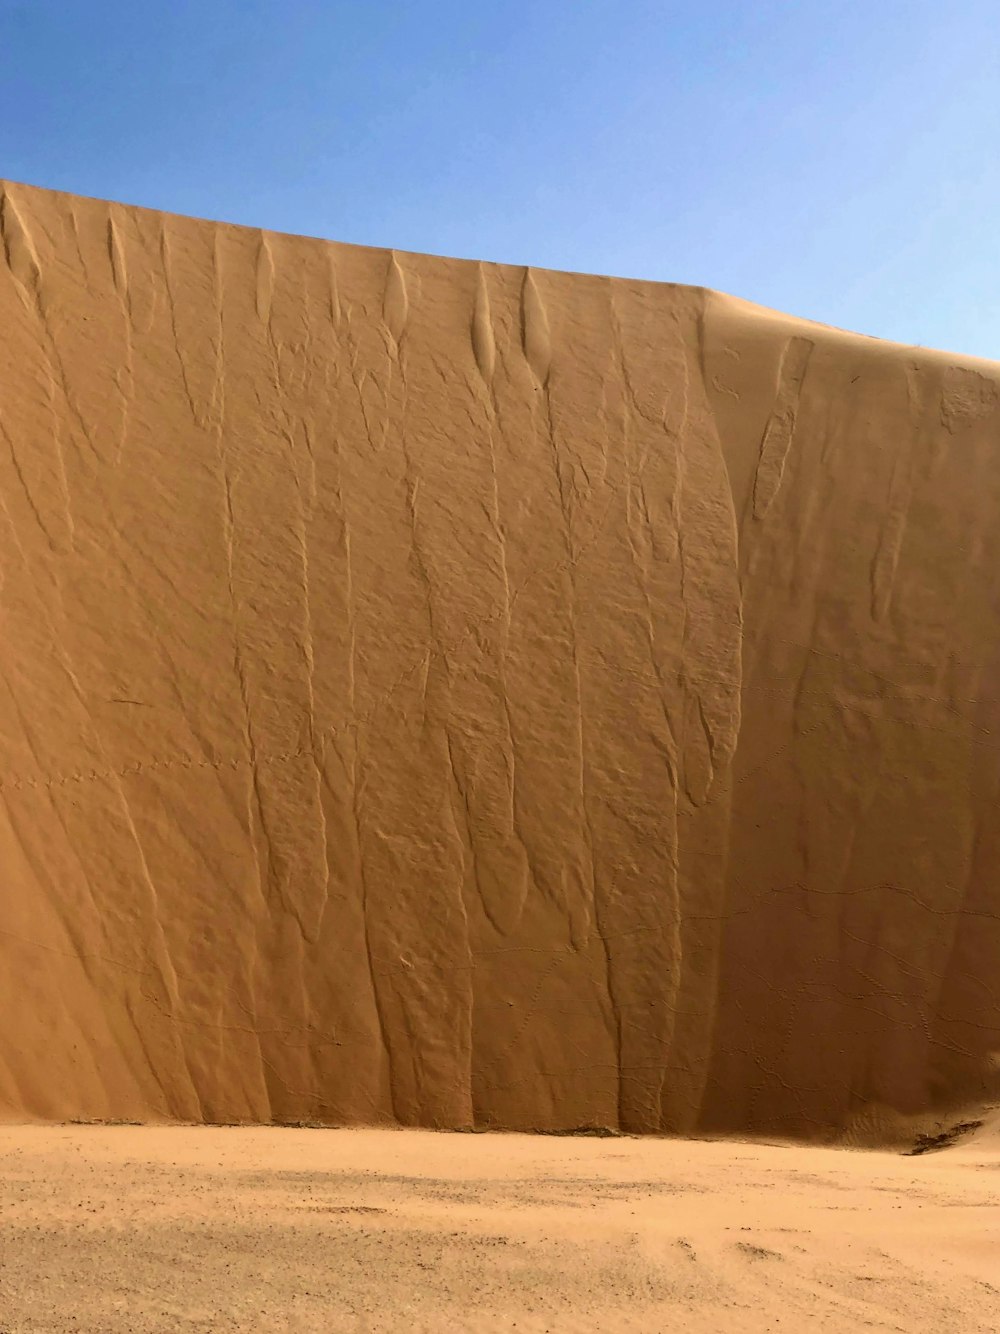 a large sand dune in the middle of the desert